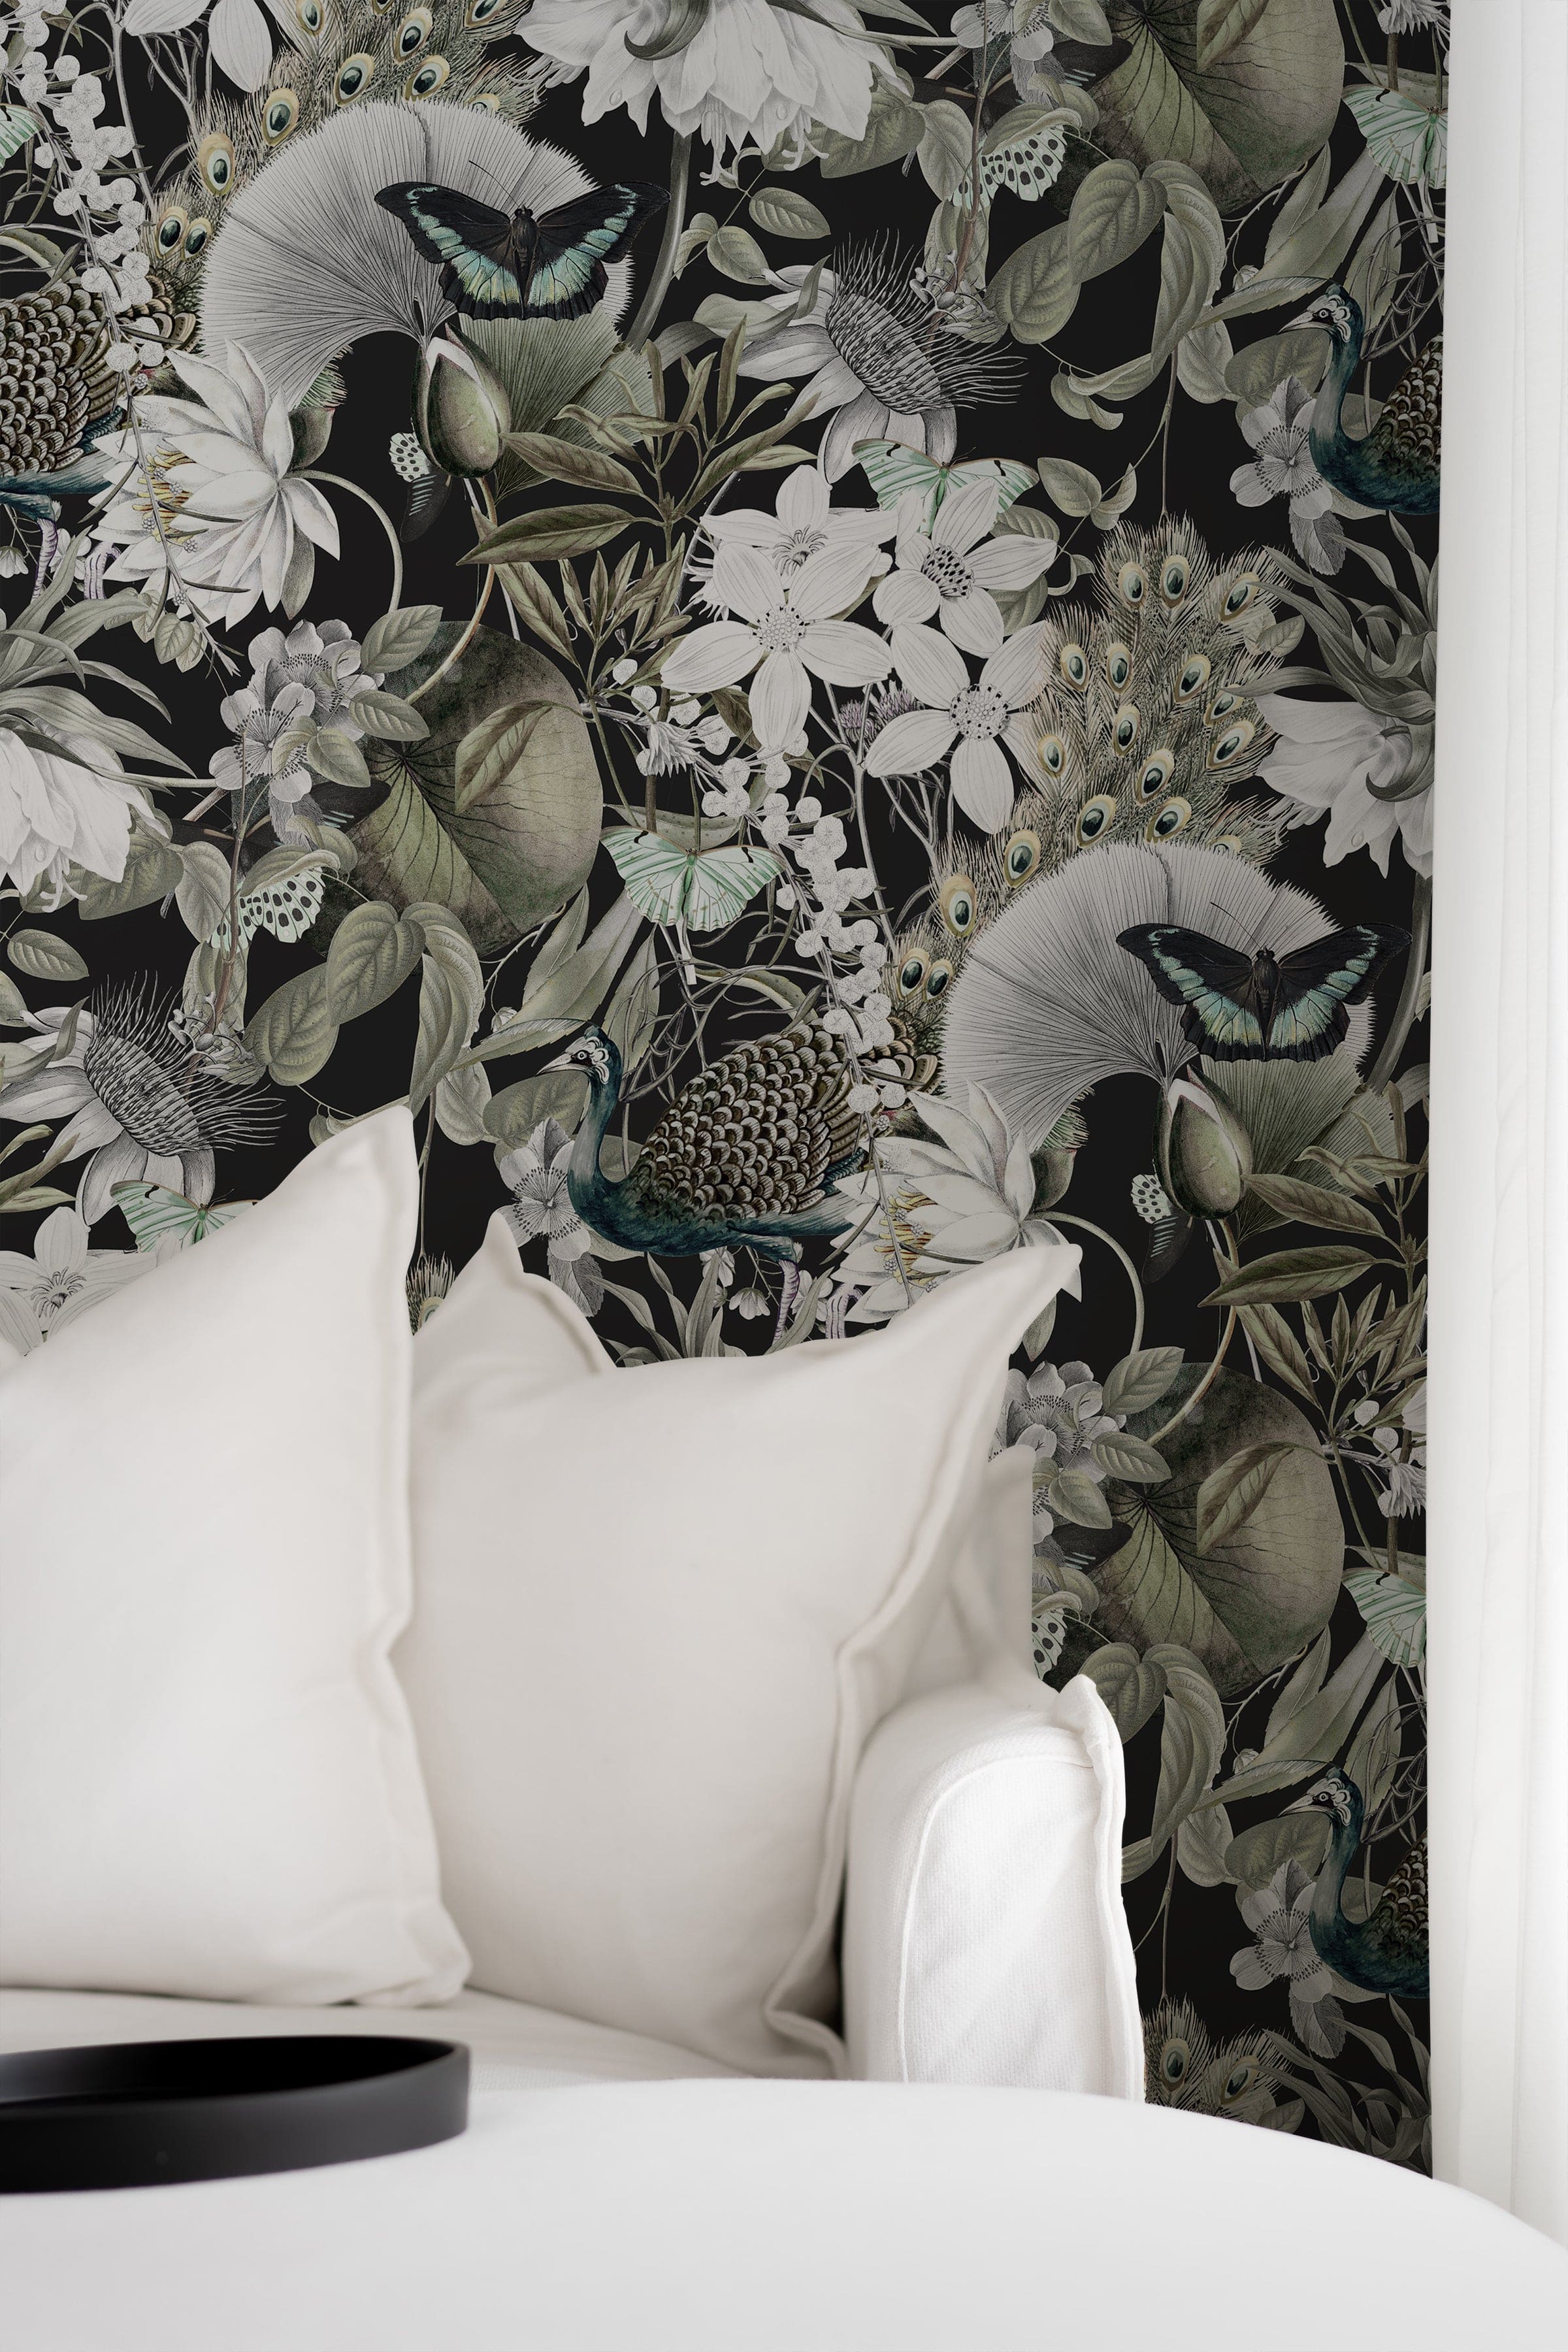 A cozy nook enhanced by the 'Moody Botanicals Wallpaper', adding depth and intrigue to the space. The detailed black and white botanical and animal designs provide a striking backdrop to a simple white sofa adorned with neutral pillows, merging comfort with high style